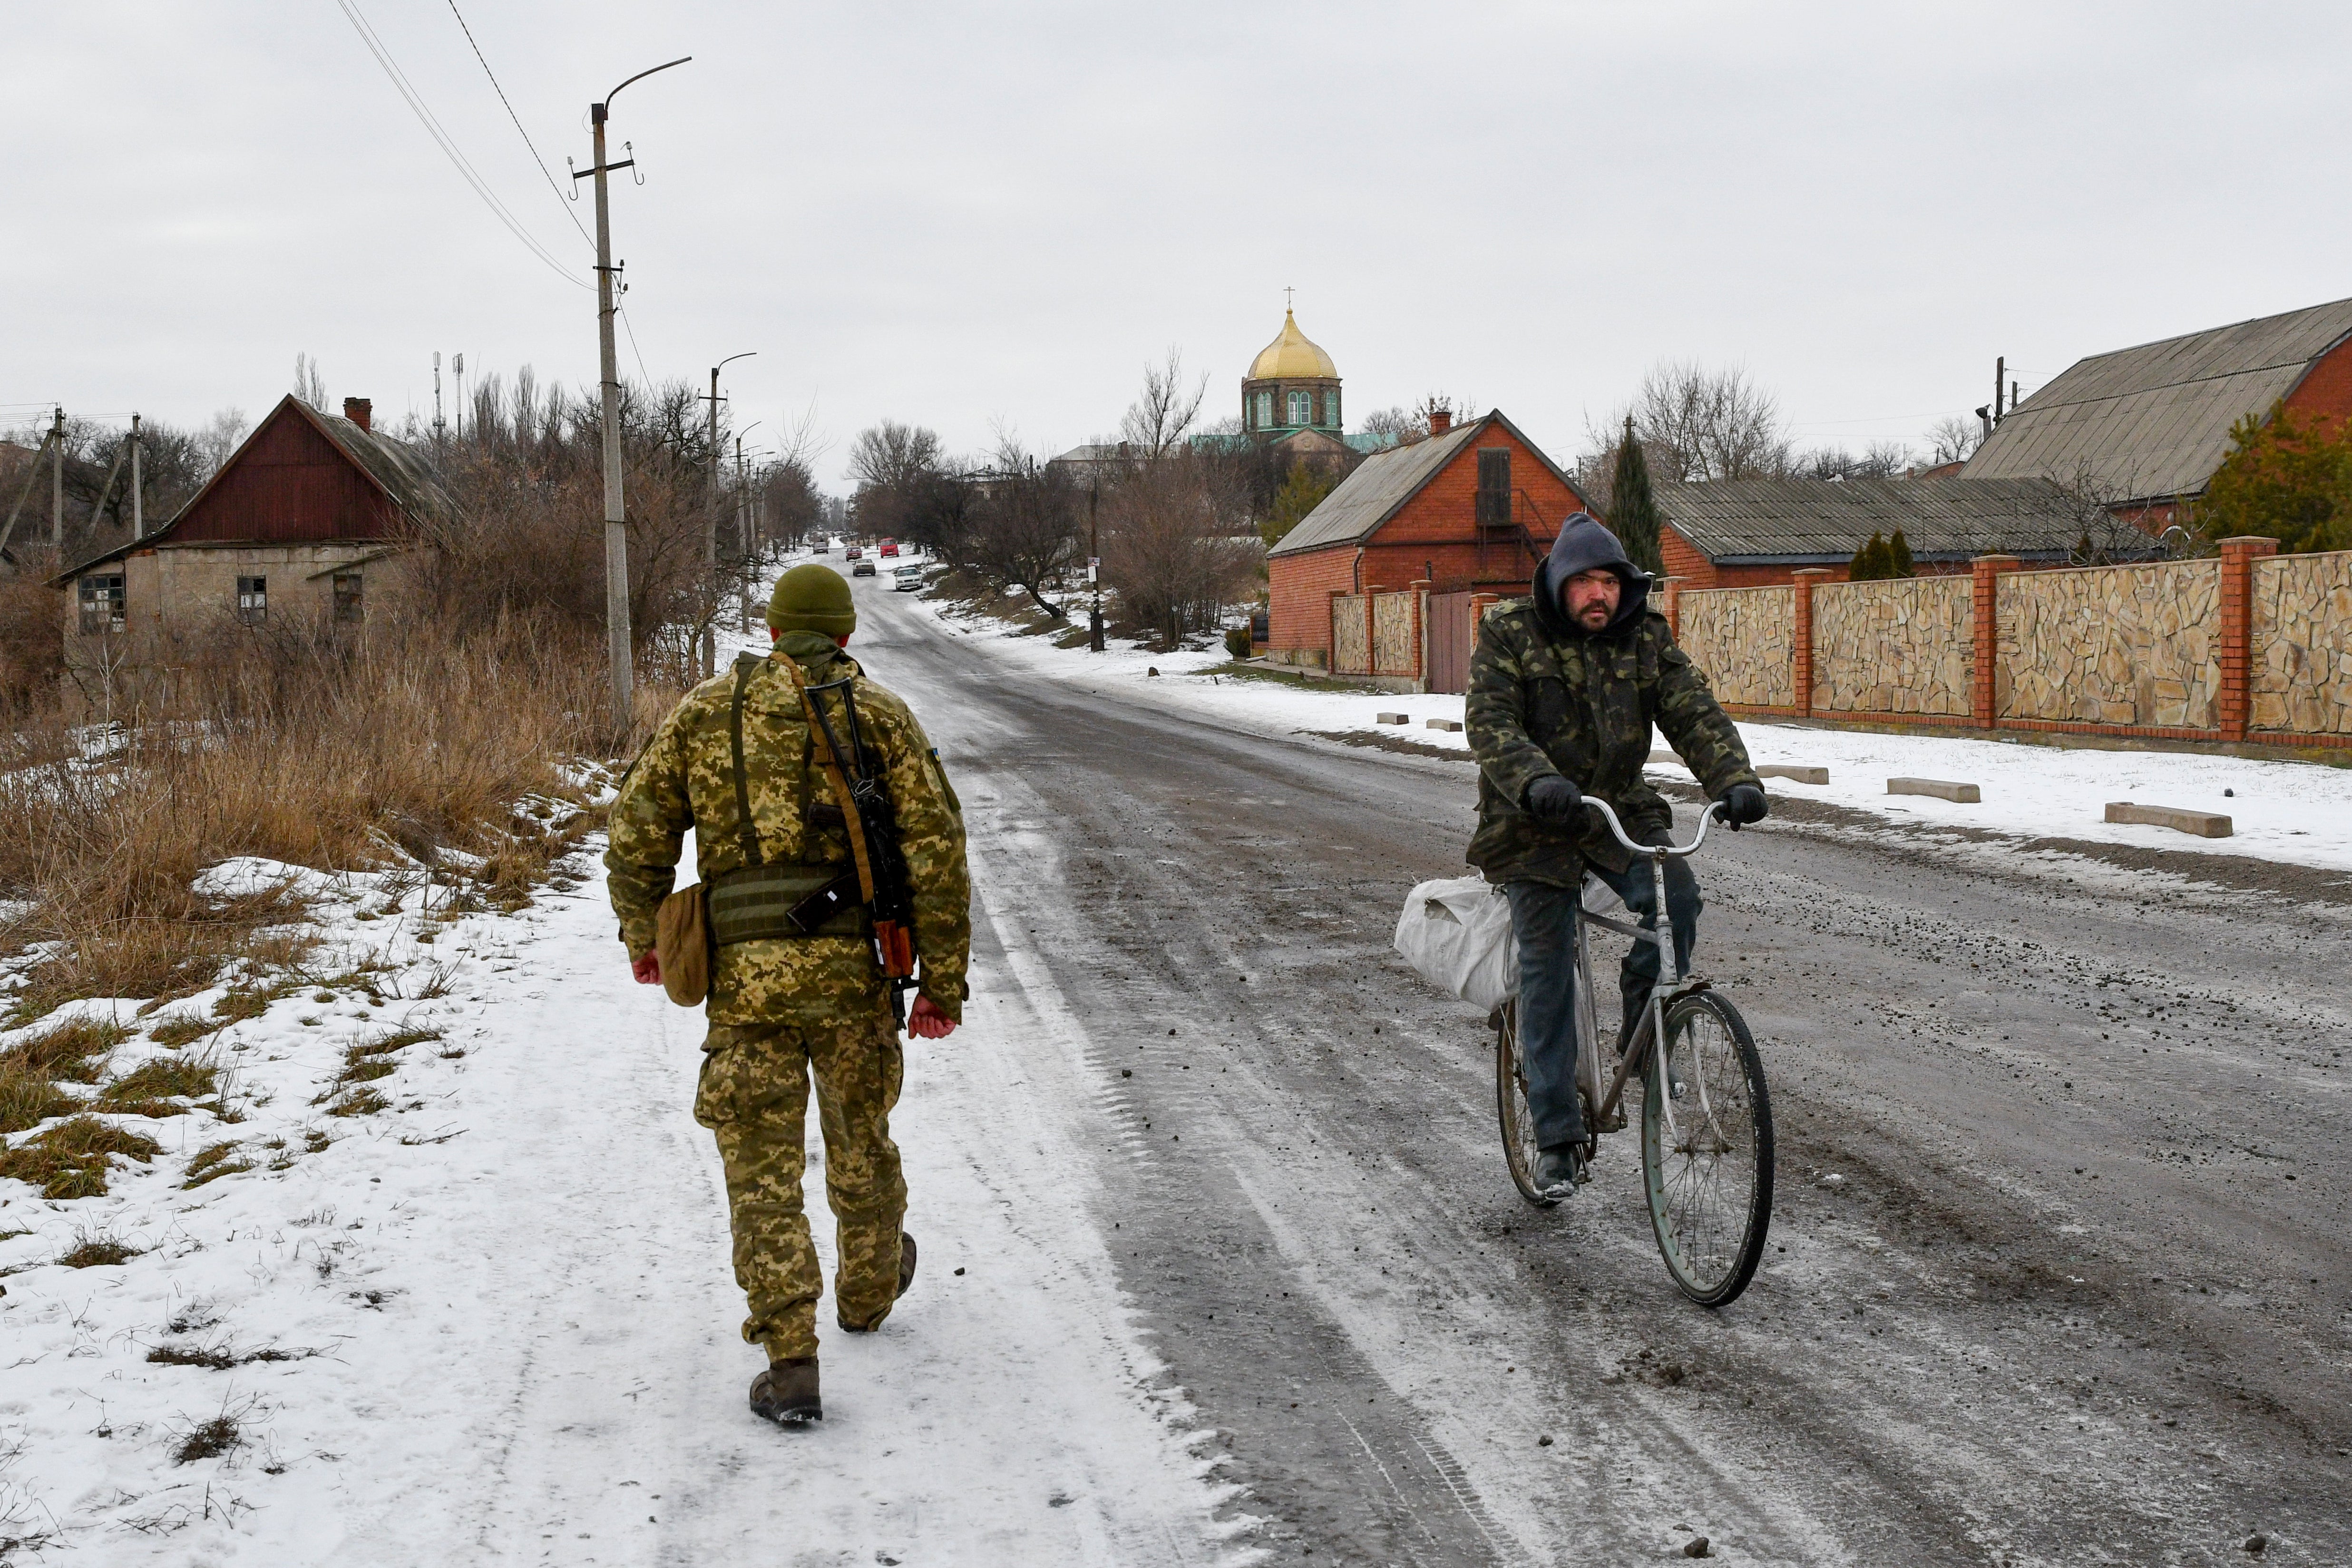 Ukraine On the Front Lines